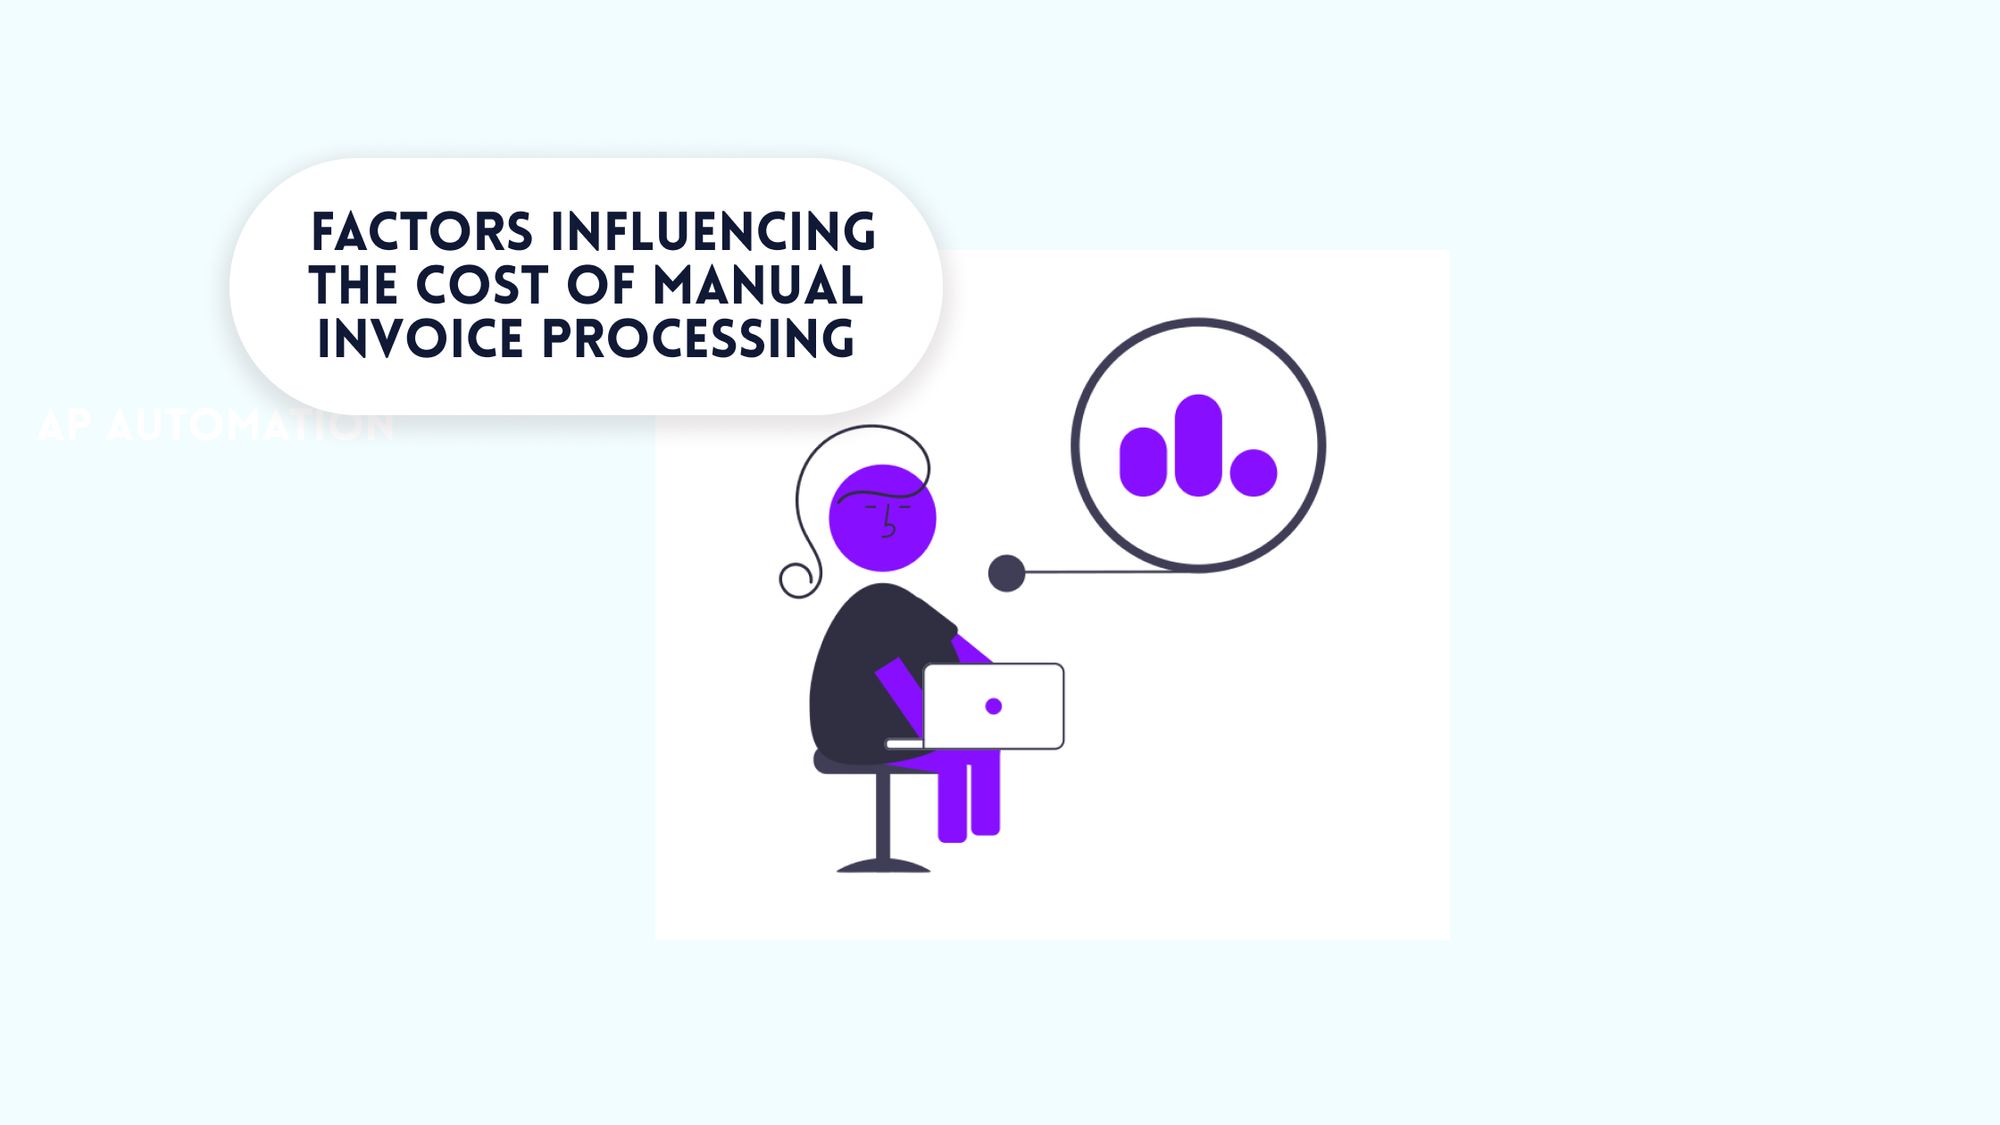 Exploring the Factors Influencing the Cost of Manual Invoice Processing